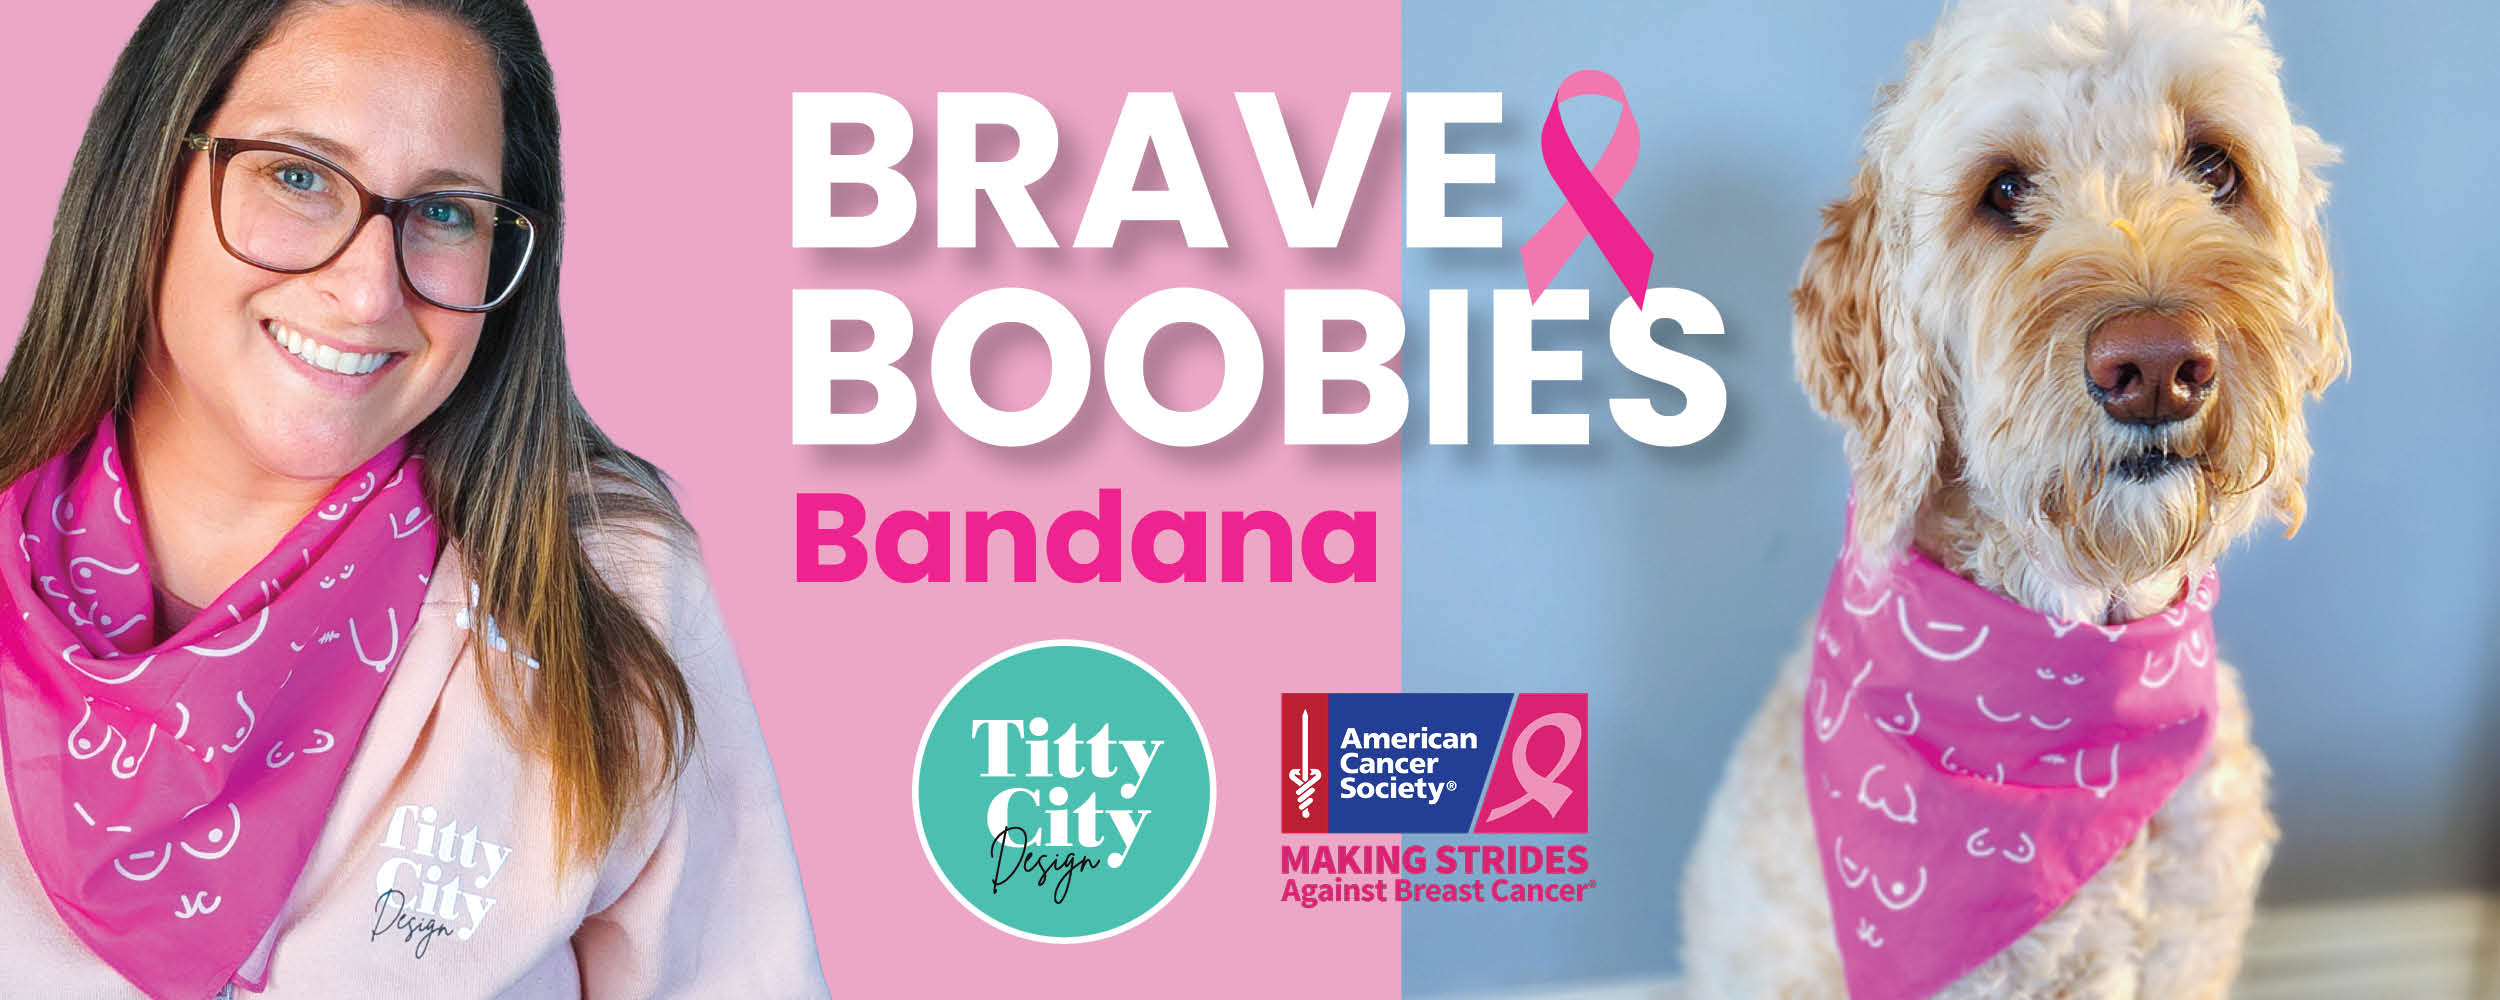 Breast Cancer Awareness Month Recap - Brave Boobies Bandanas American Cancer Society Making Strides Against Breast Cancer TItty City Desgin